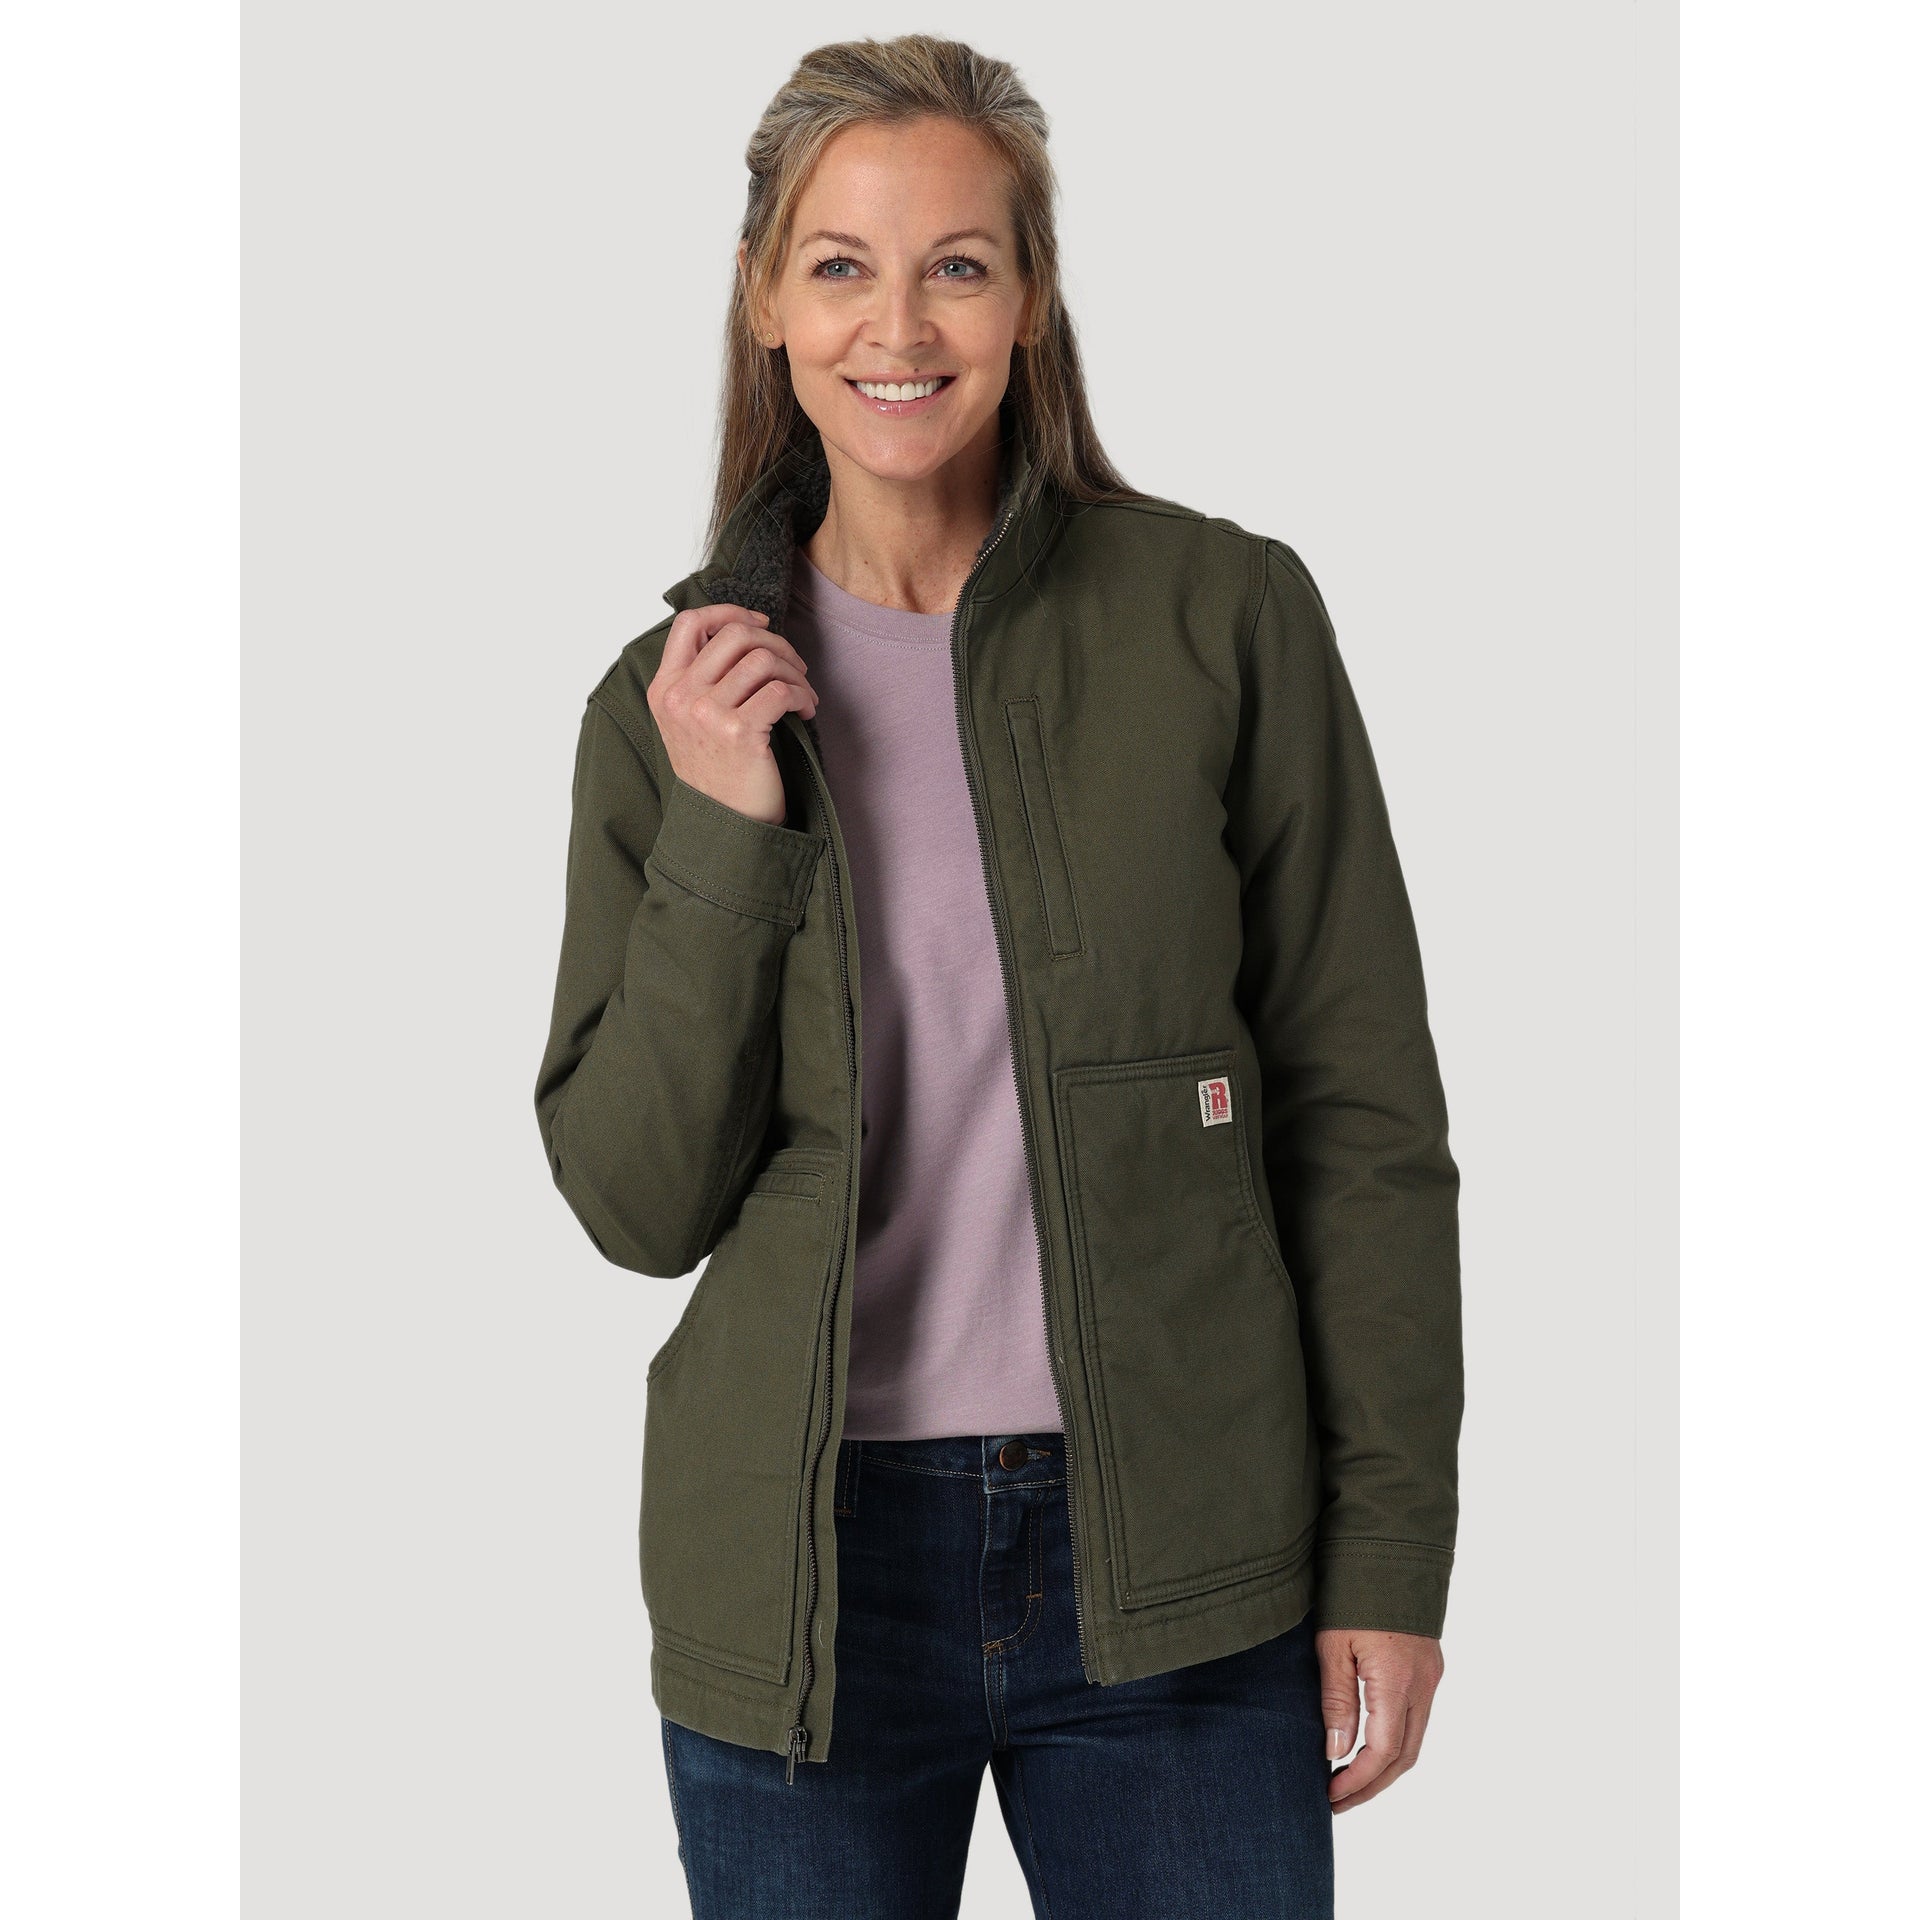 Wrangler Womens Riggs Sherpa Lined Canvas Jacket (Green)